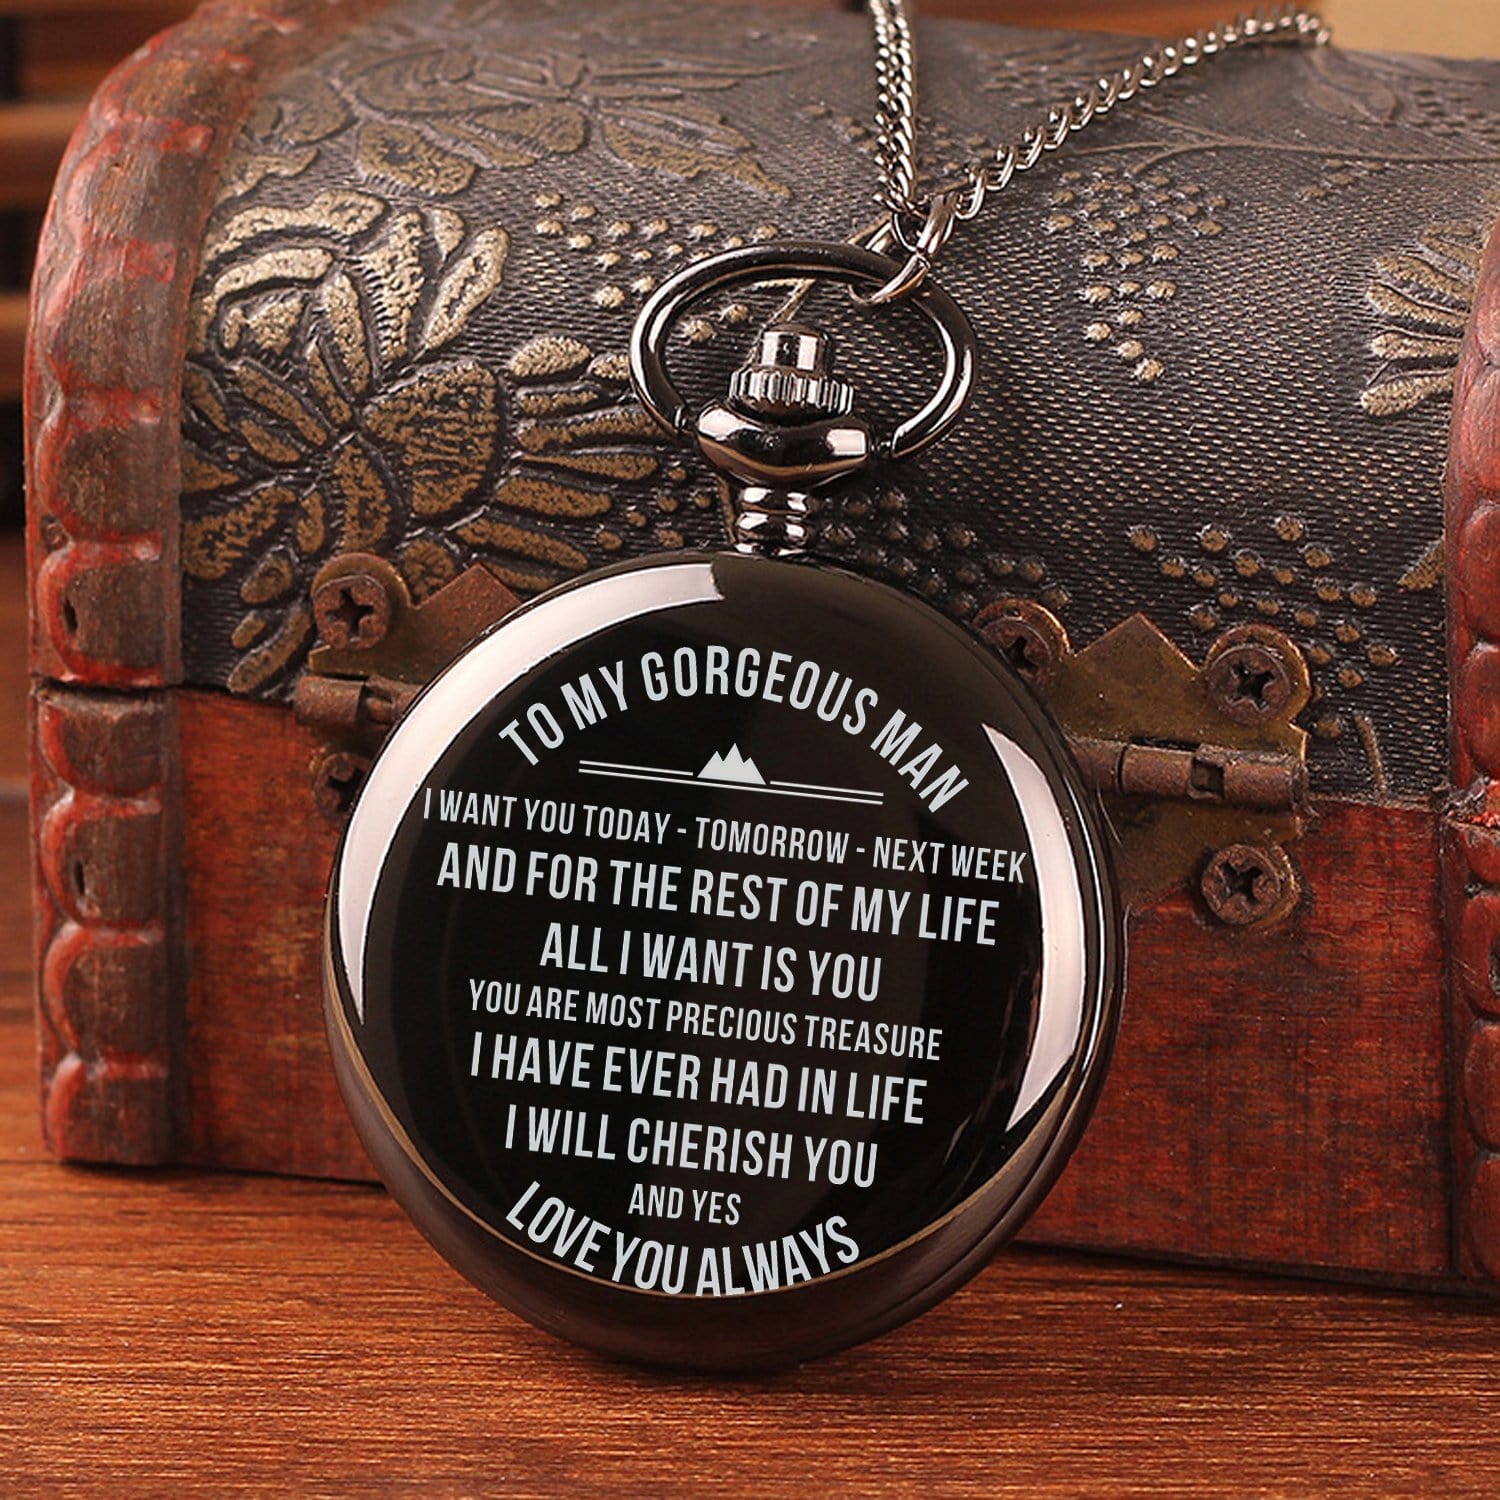 Pocket Watches To My Man - All I Want Is You Pocket Watch GiveMe-Gifts